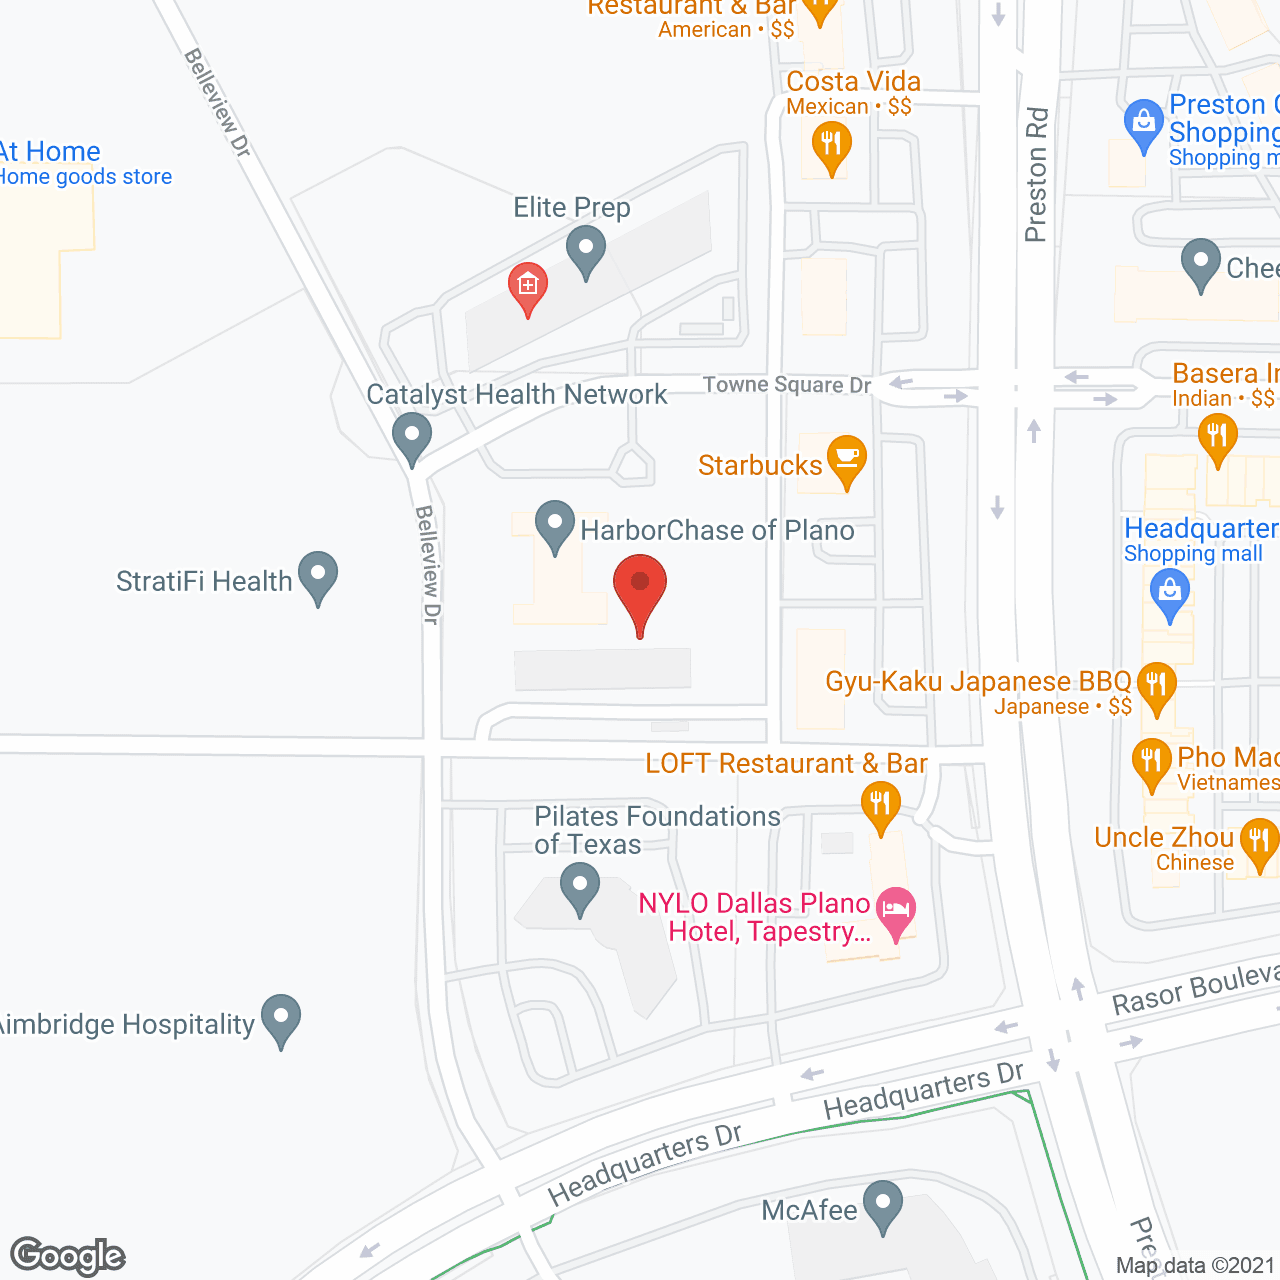 HarborChase of Plano in google map